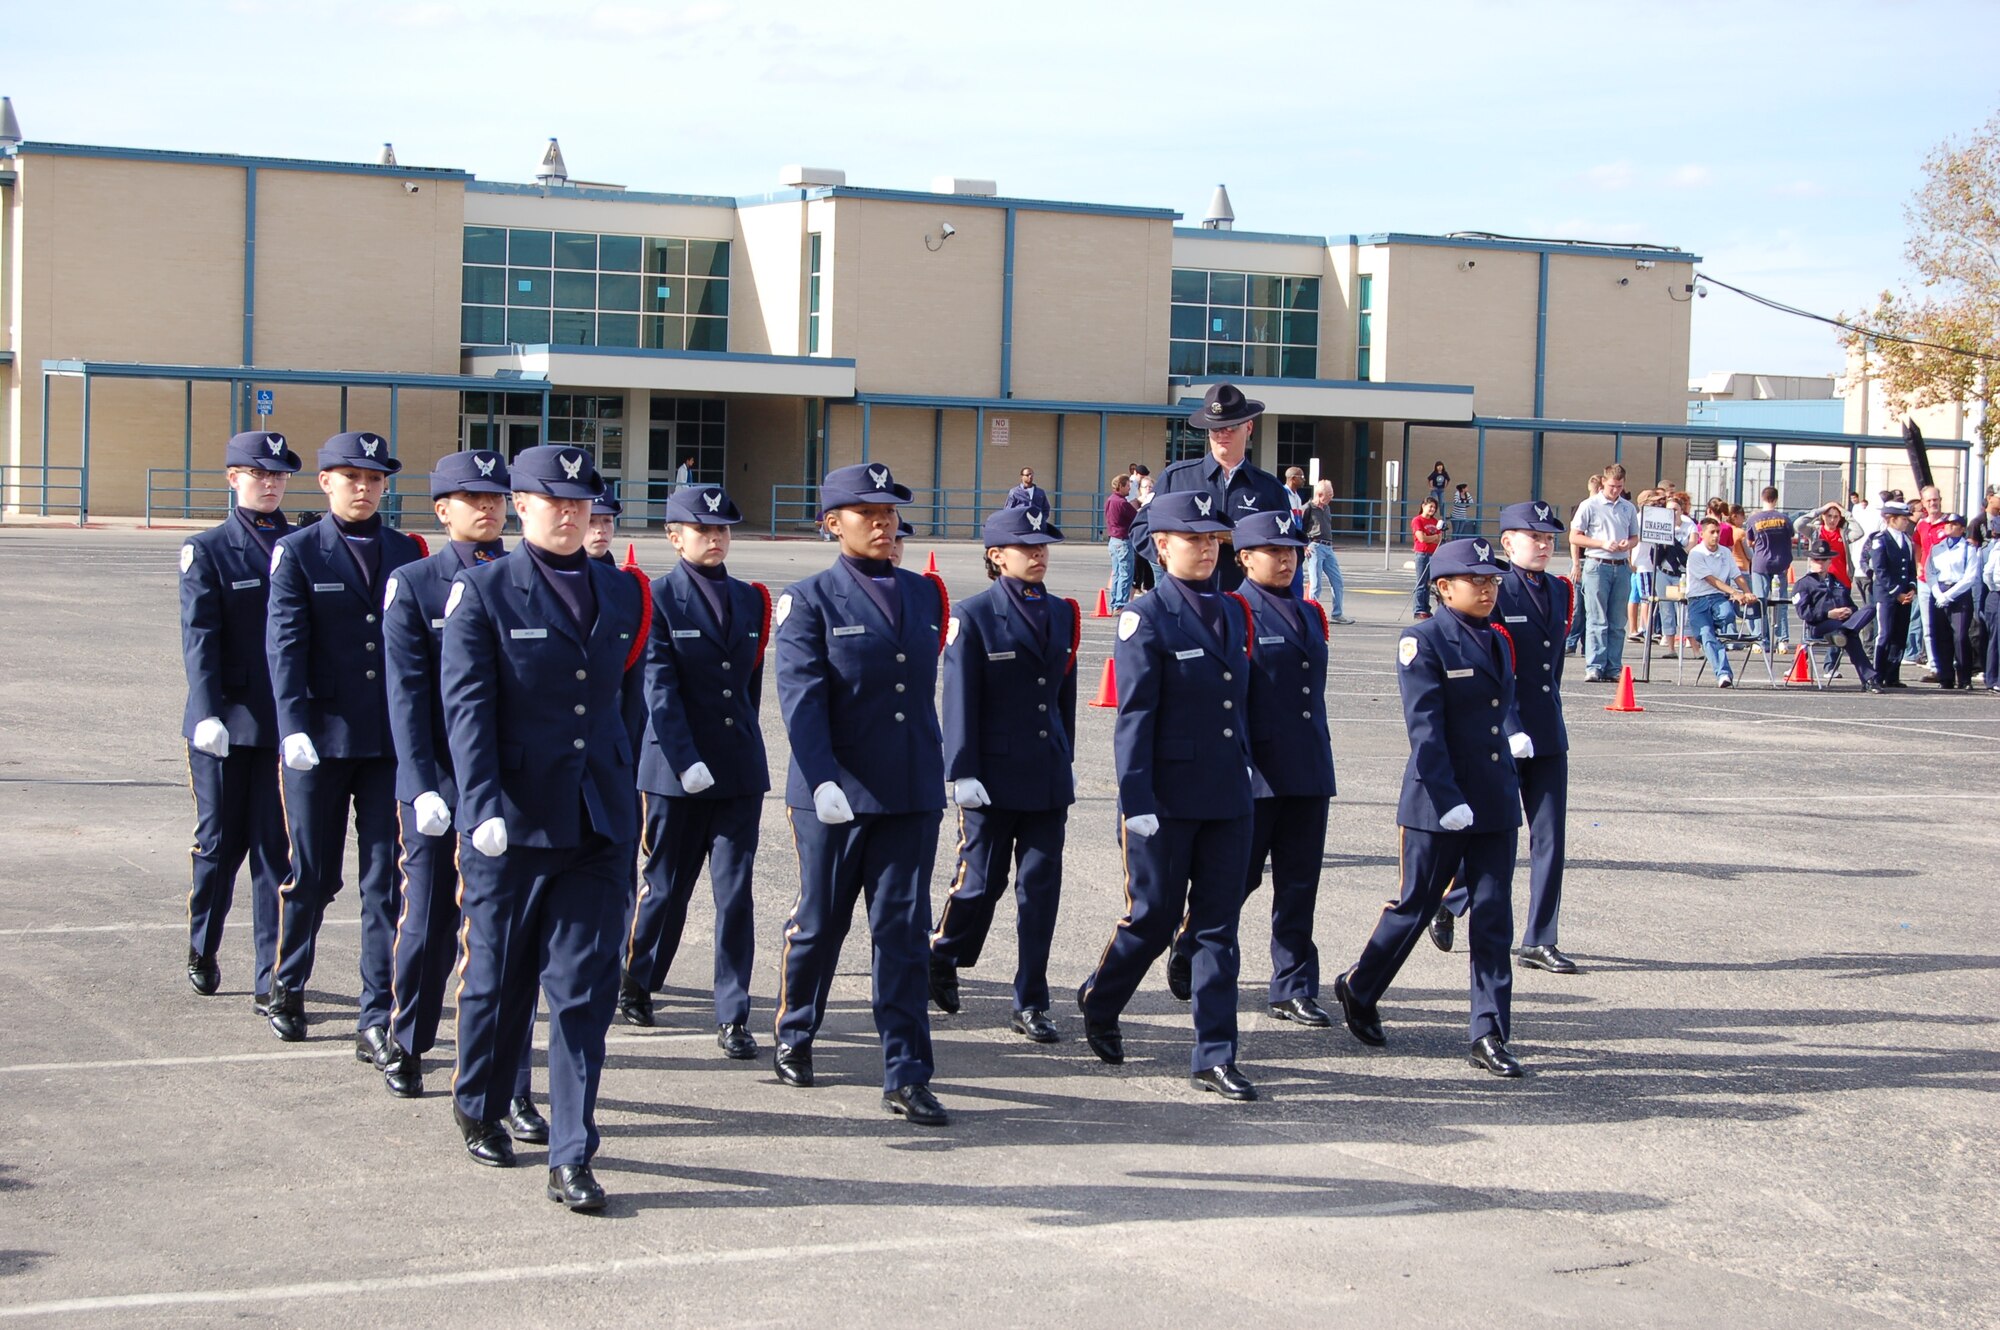 Members of the Klein Collins High School Air Force Junior Reserve Officer Training Corps in Texas prepare to participate in the 56th Inaugural Parade, which was held Tuesday. The 36 cadets who traveled to Washington, D.C., Jan. 16 were chosen by the Presidential Inaugural Committee among more than 1,300 group applications. The unit has won five consecutive first place honors for the best Air Force unit at the Coca-Cola American Legion sponsored drill meet in Montgomery, Ala. (Courtesy photo)